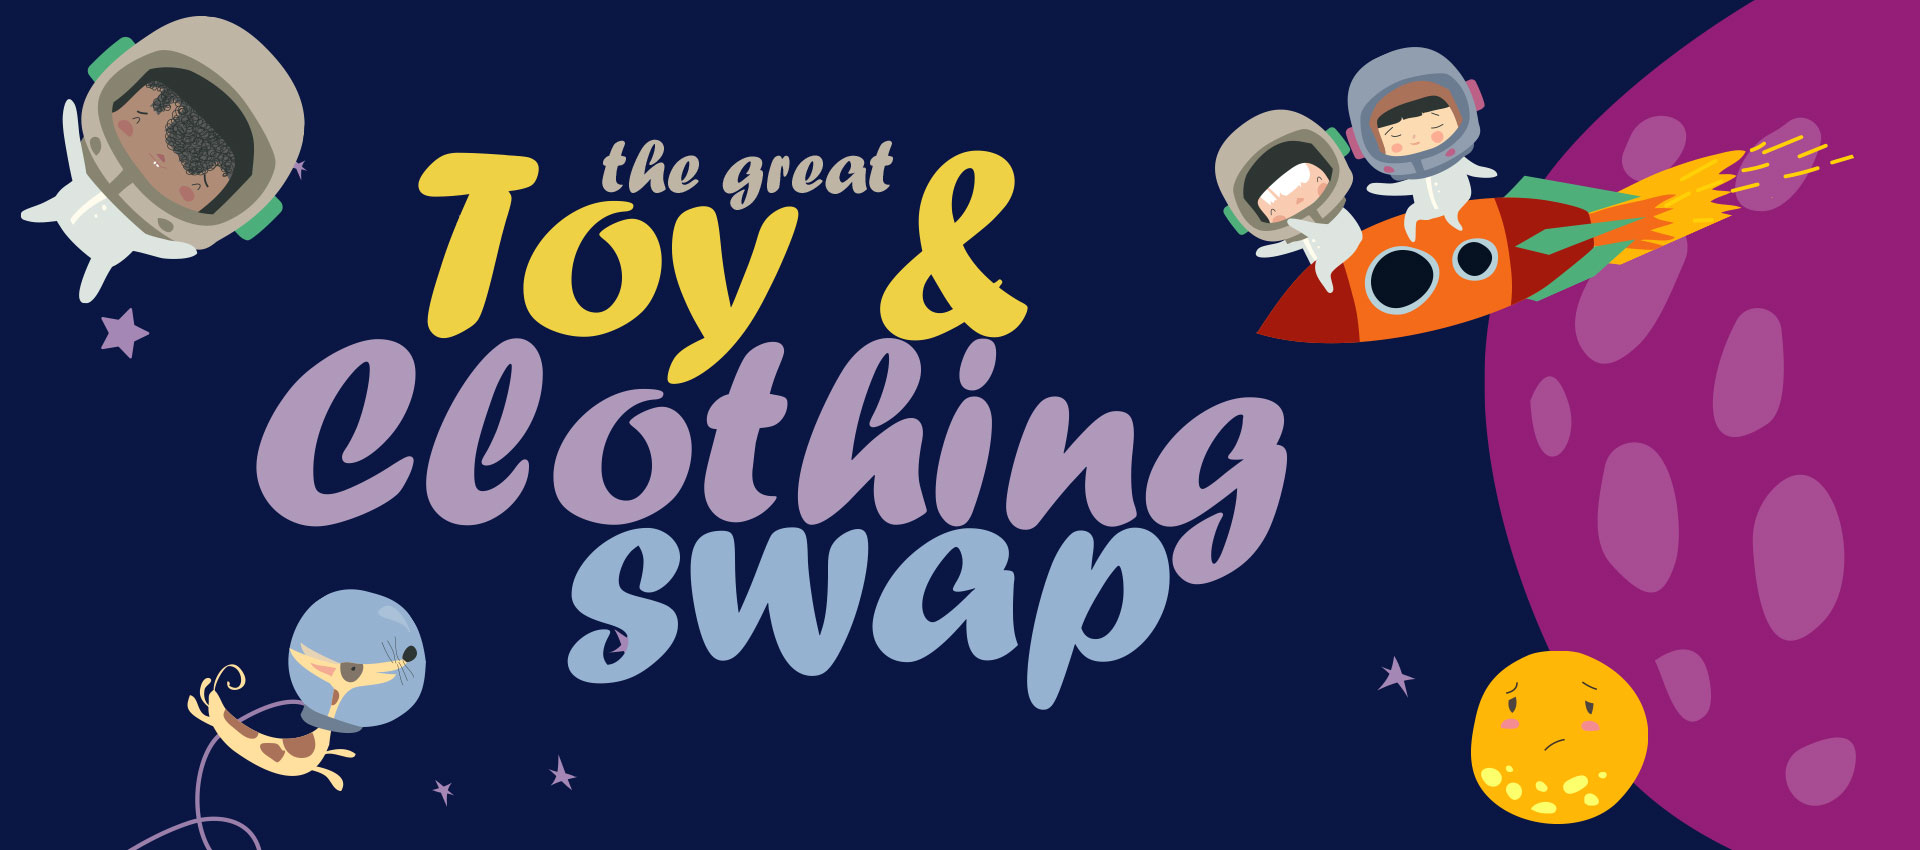 Cartoon astronauts float around the event title: the great toy and clothing swap